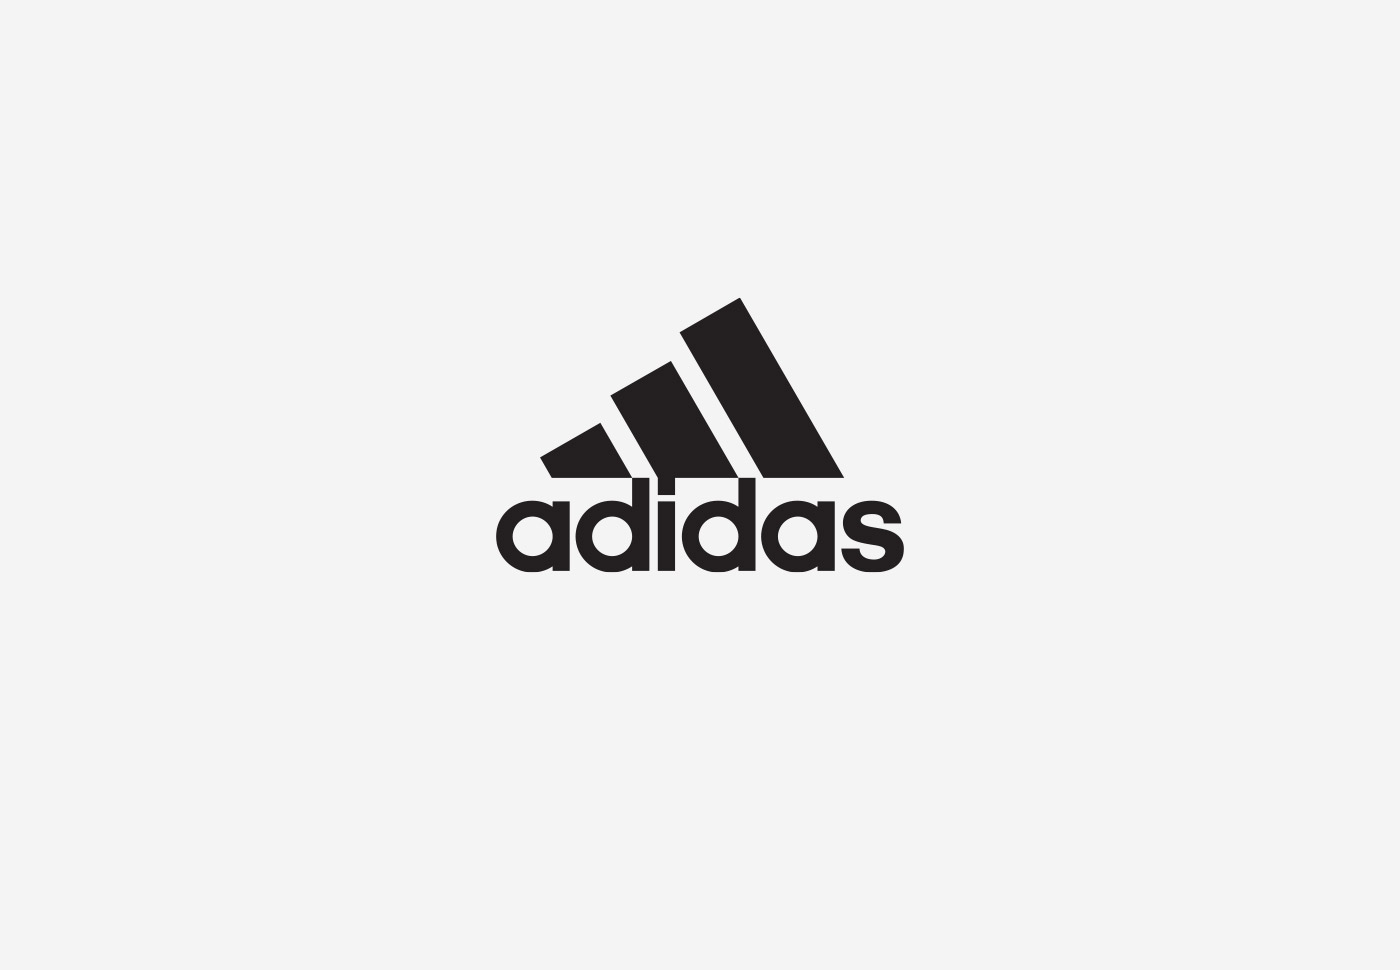 Adidas – Creative direction and design consulting